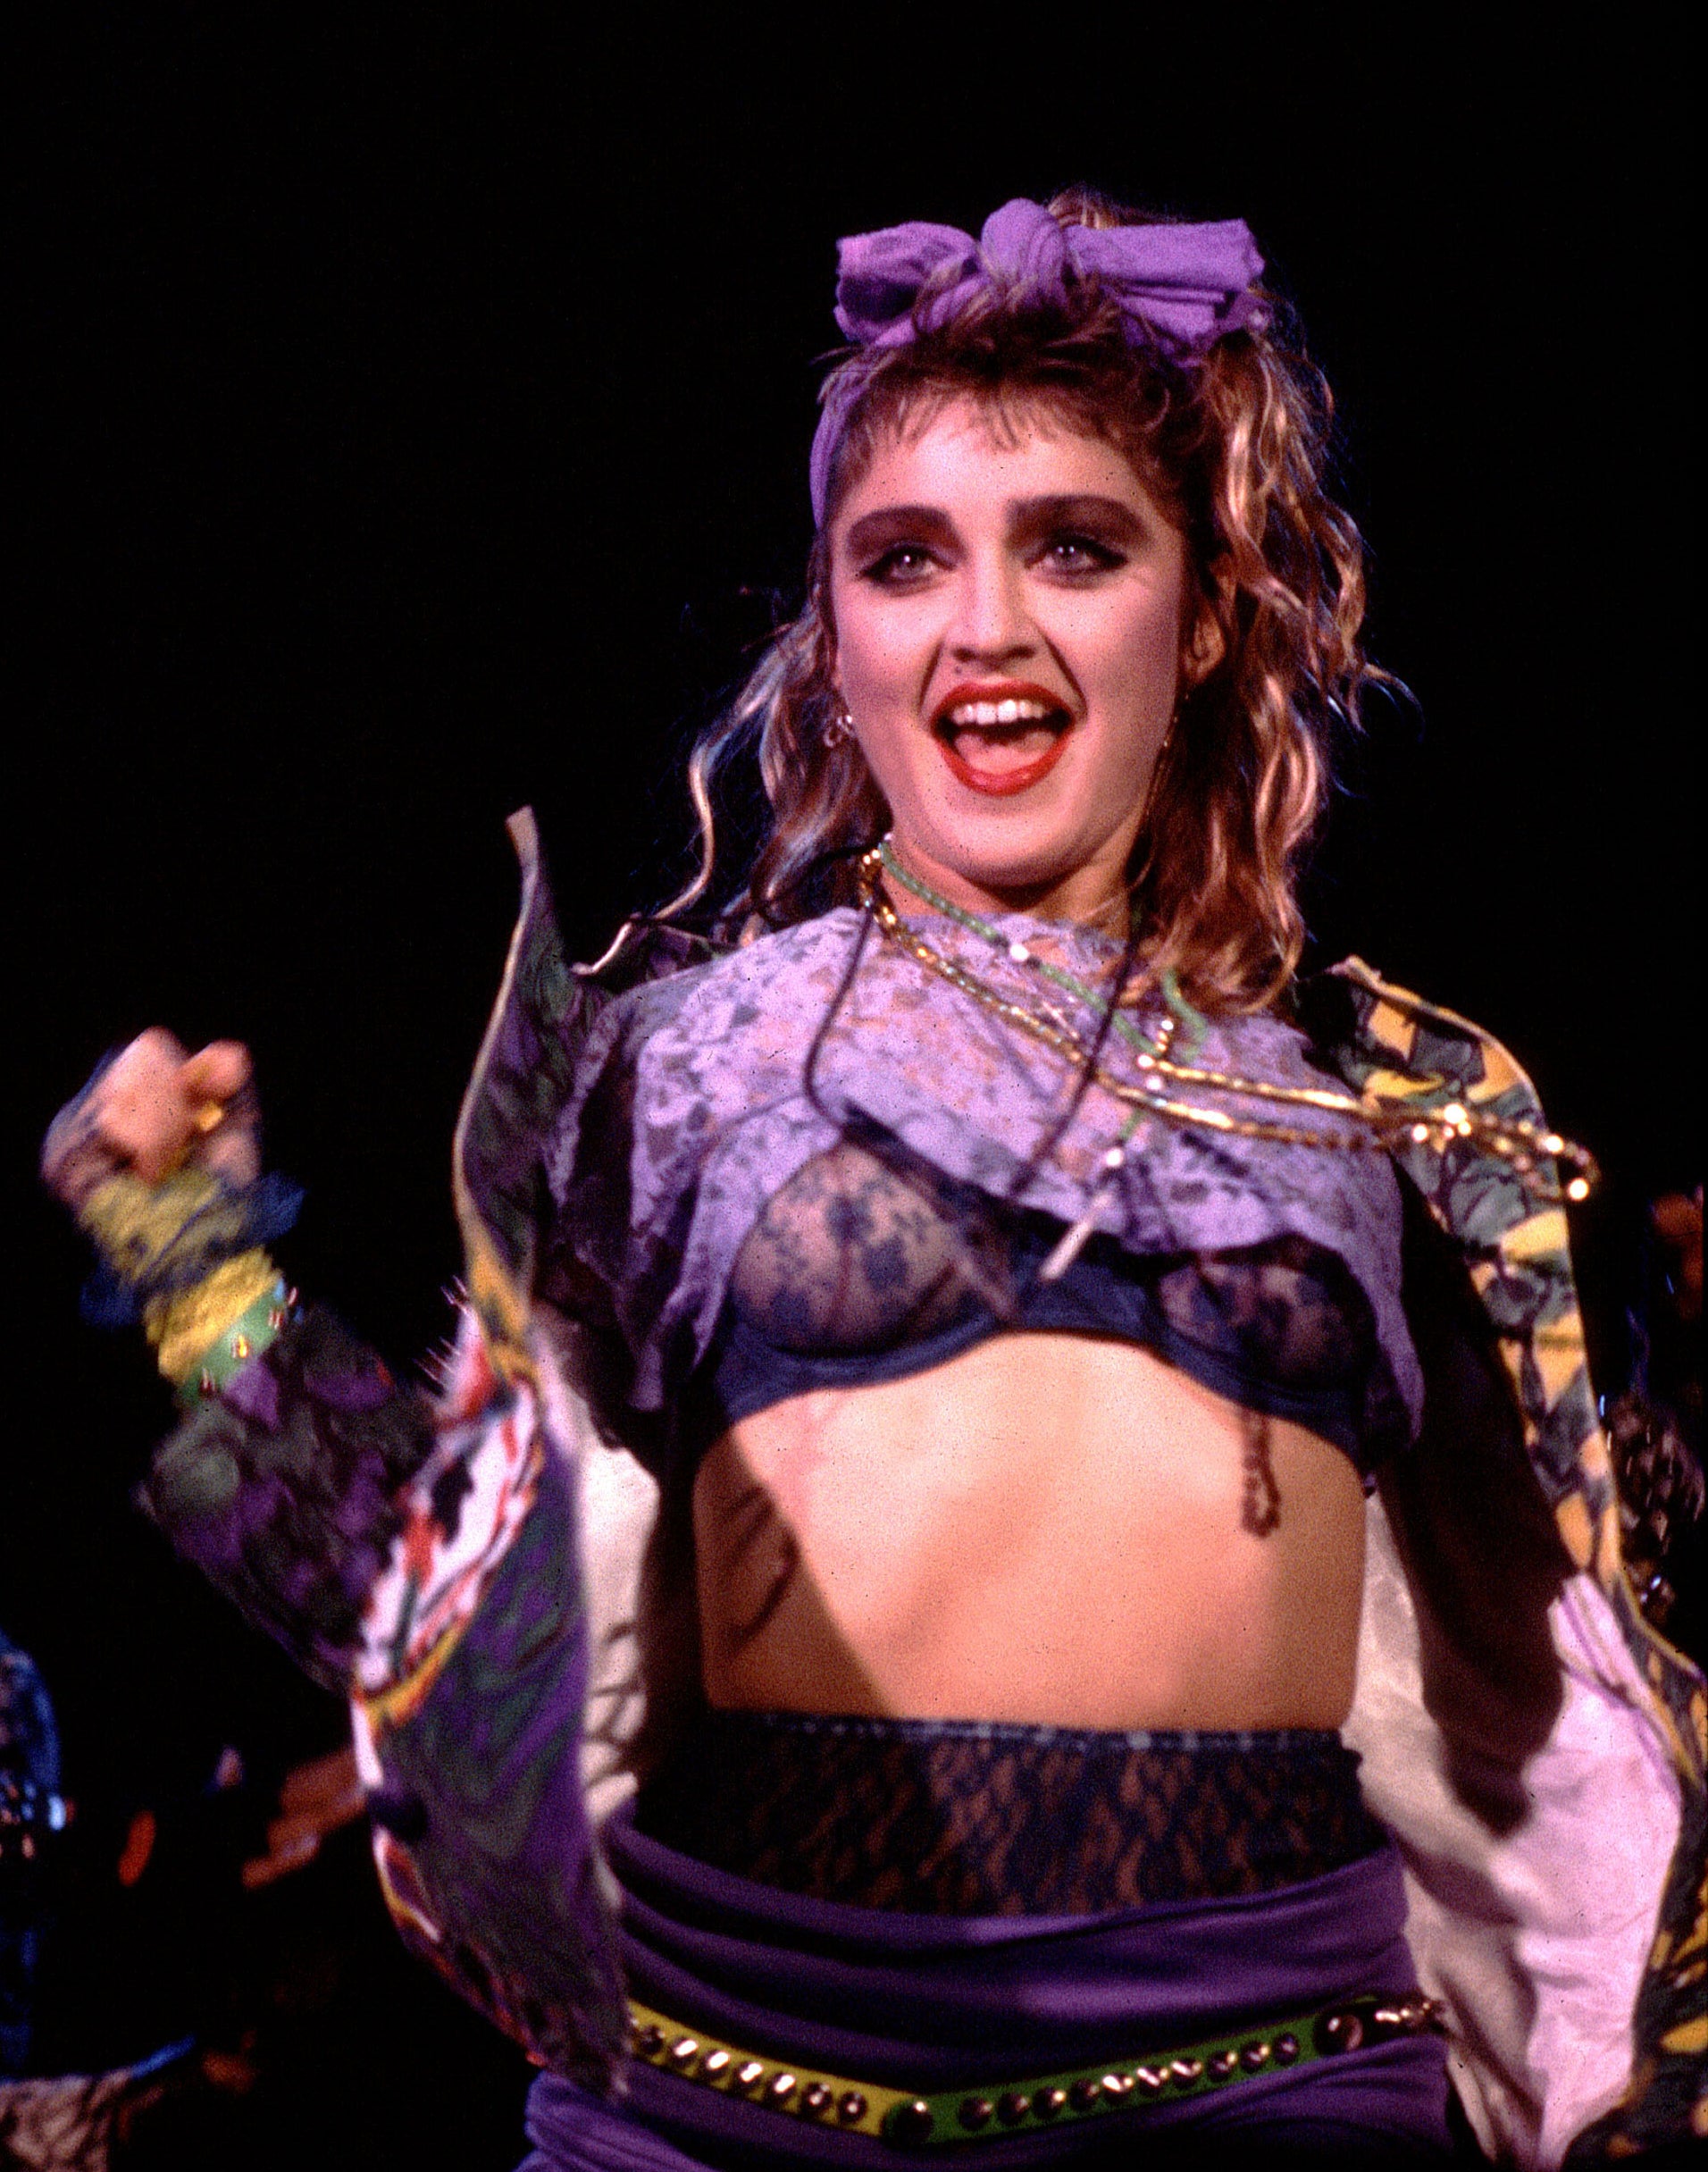 madonna on stage in the 80s